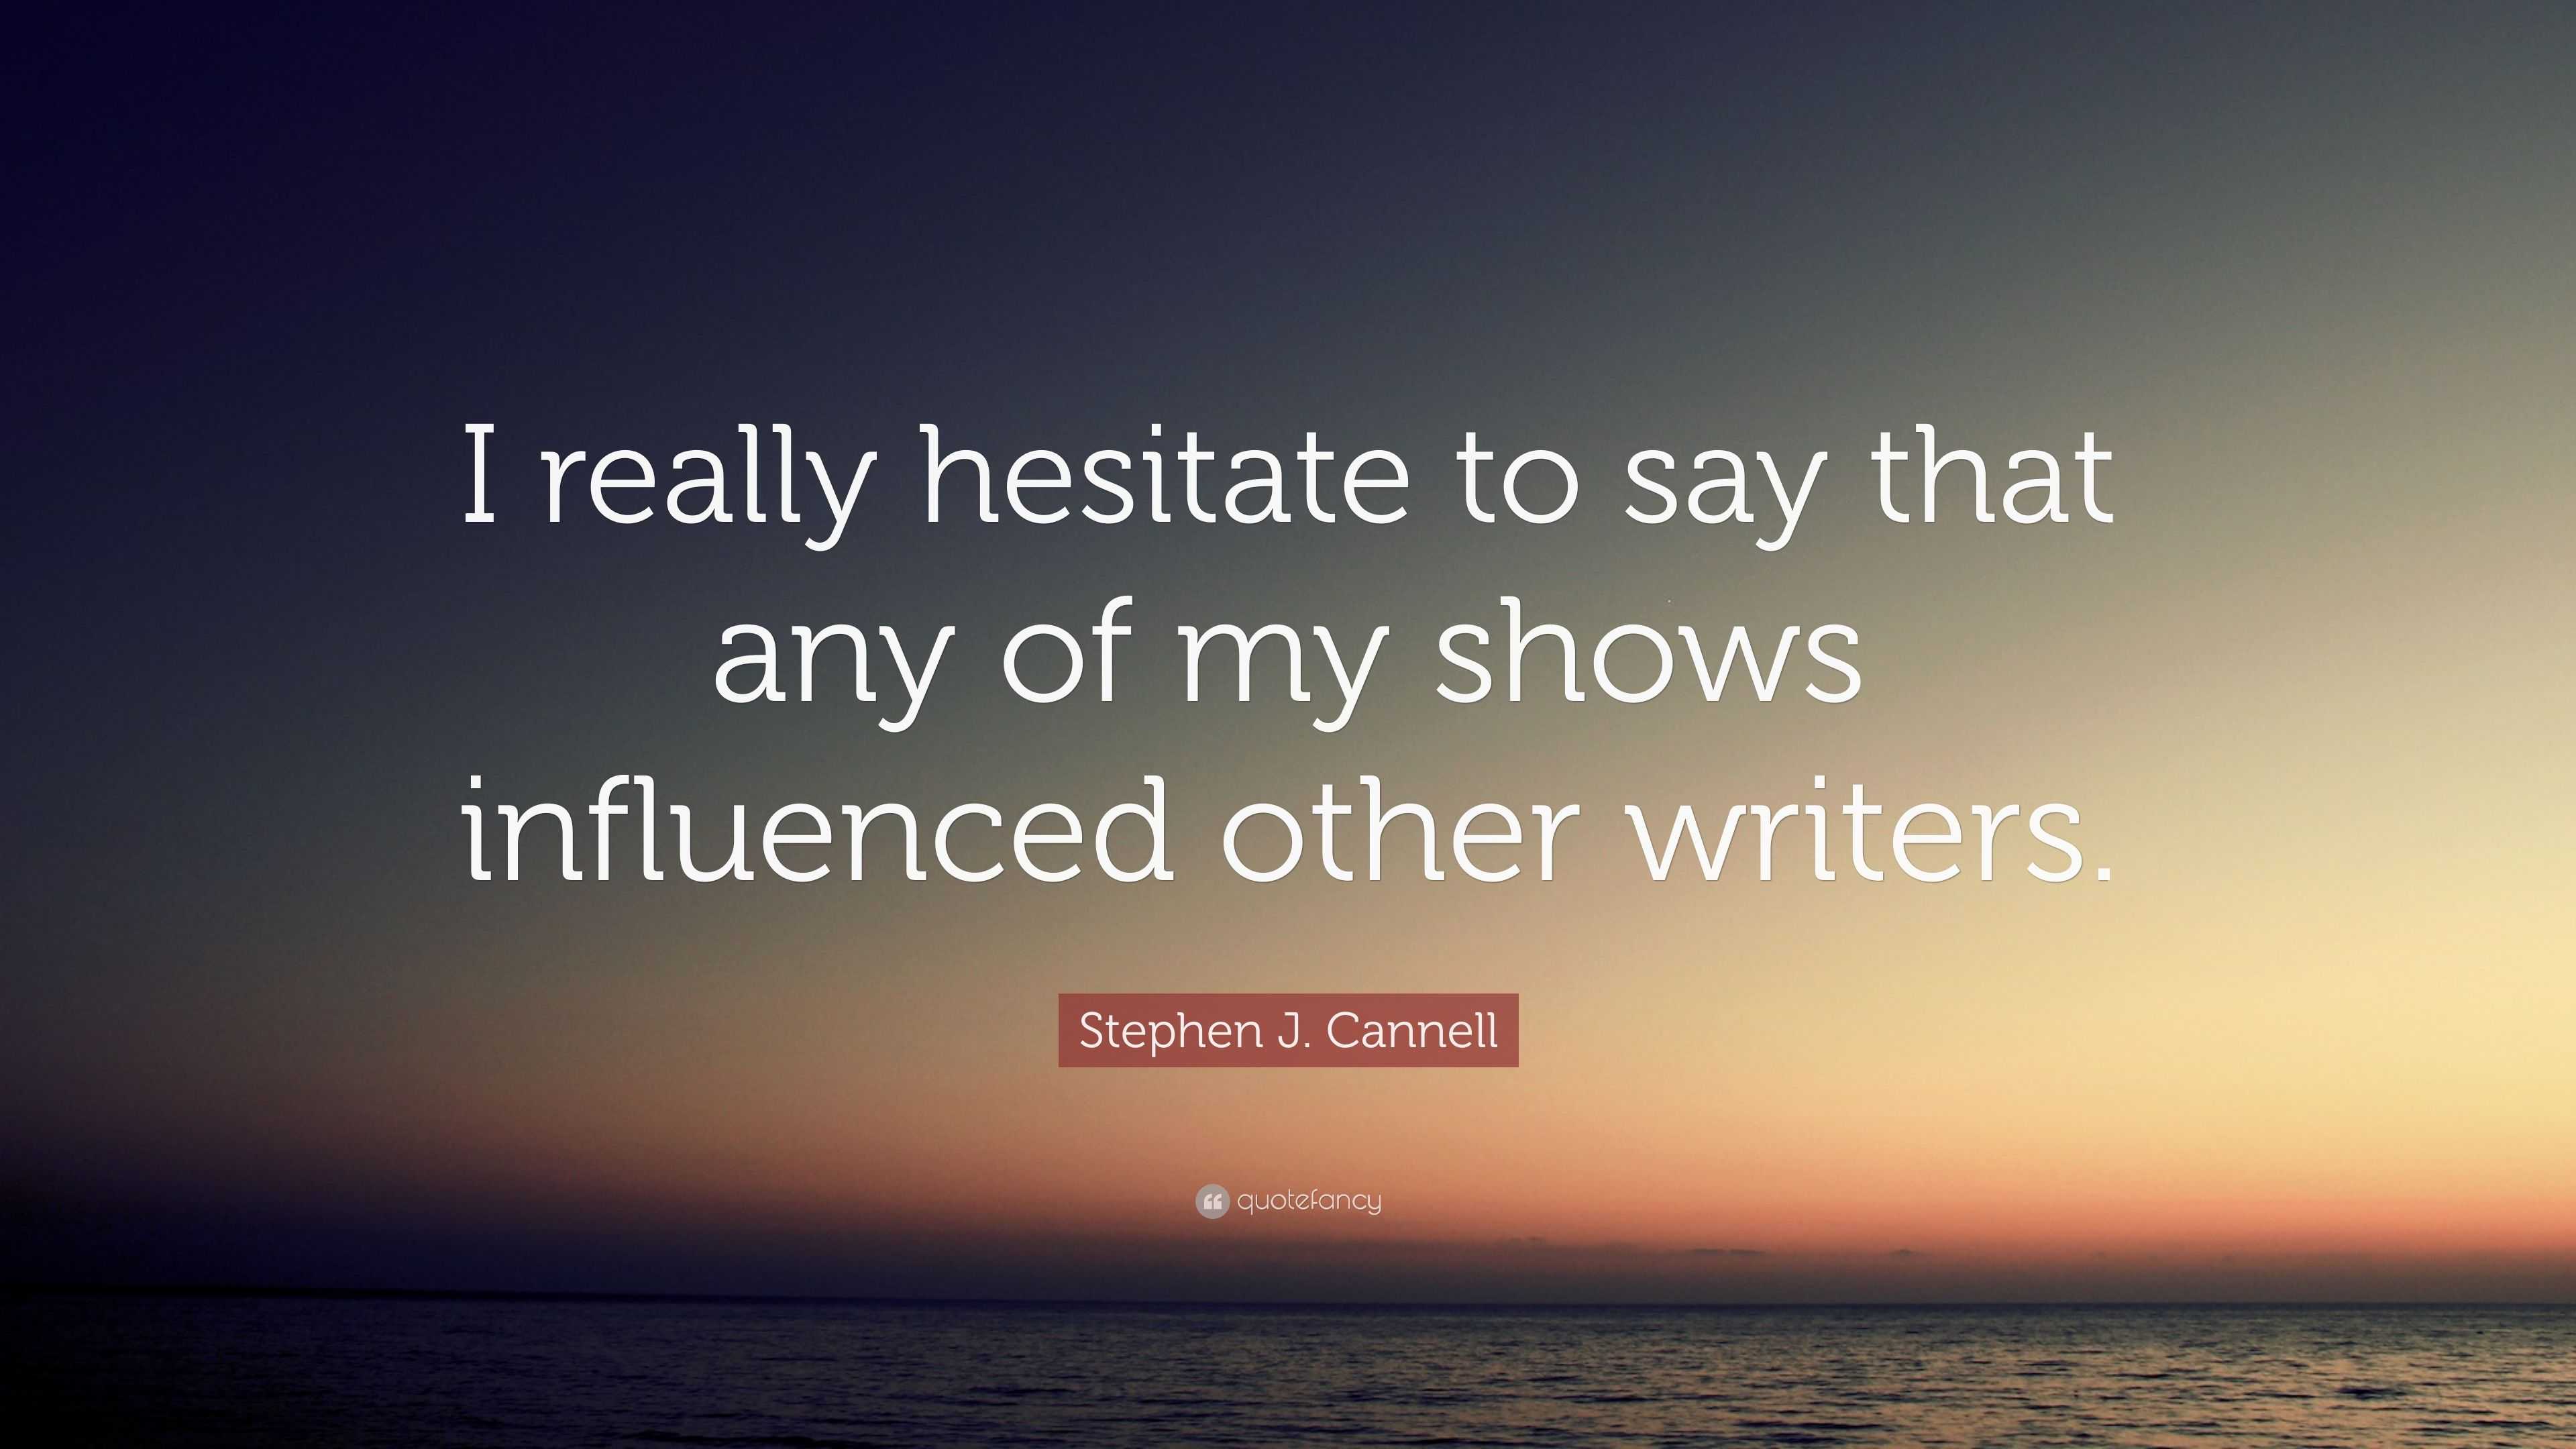 Stephen J Cannell Quote I Really Hesitate To Say That Any Of My Shows Influenced Other